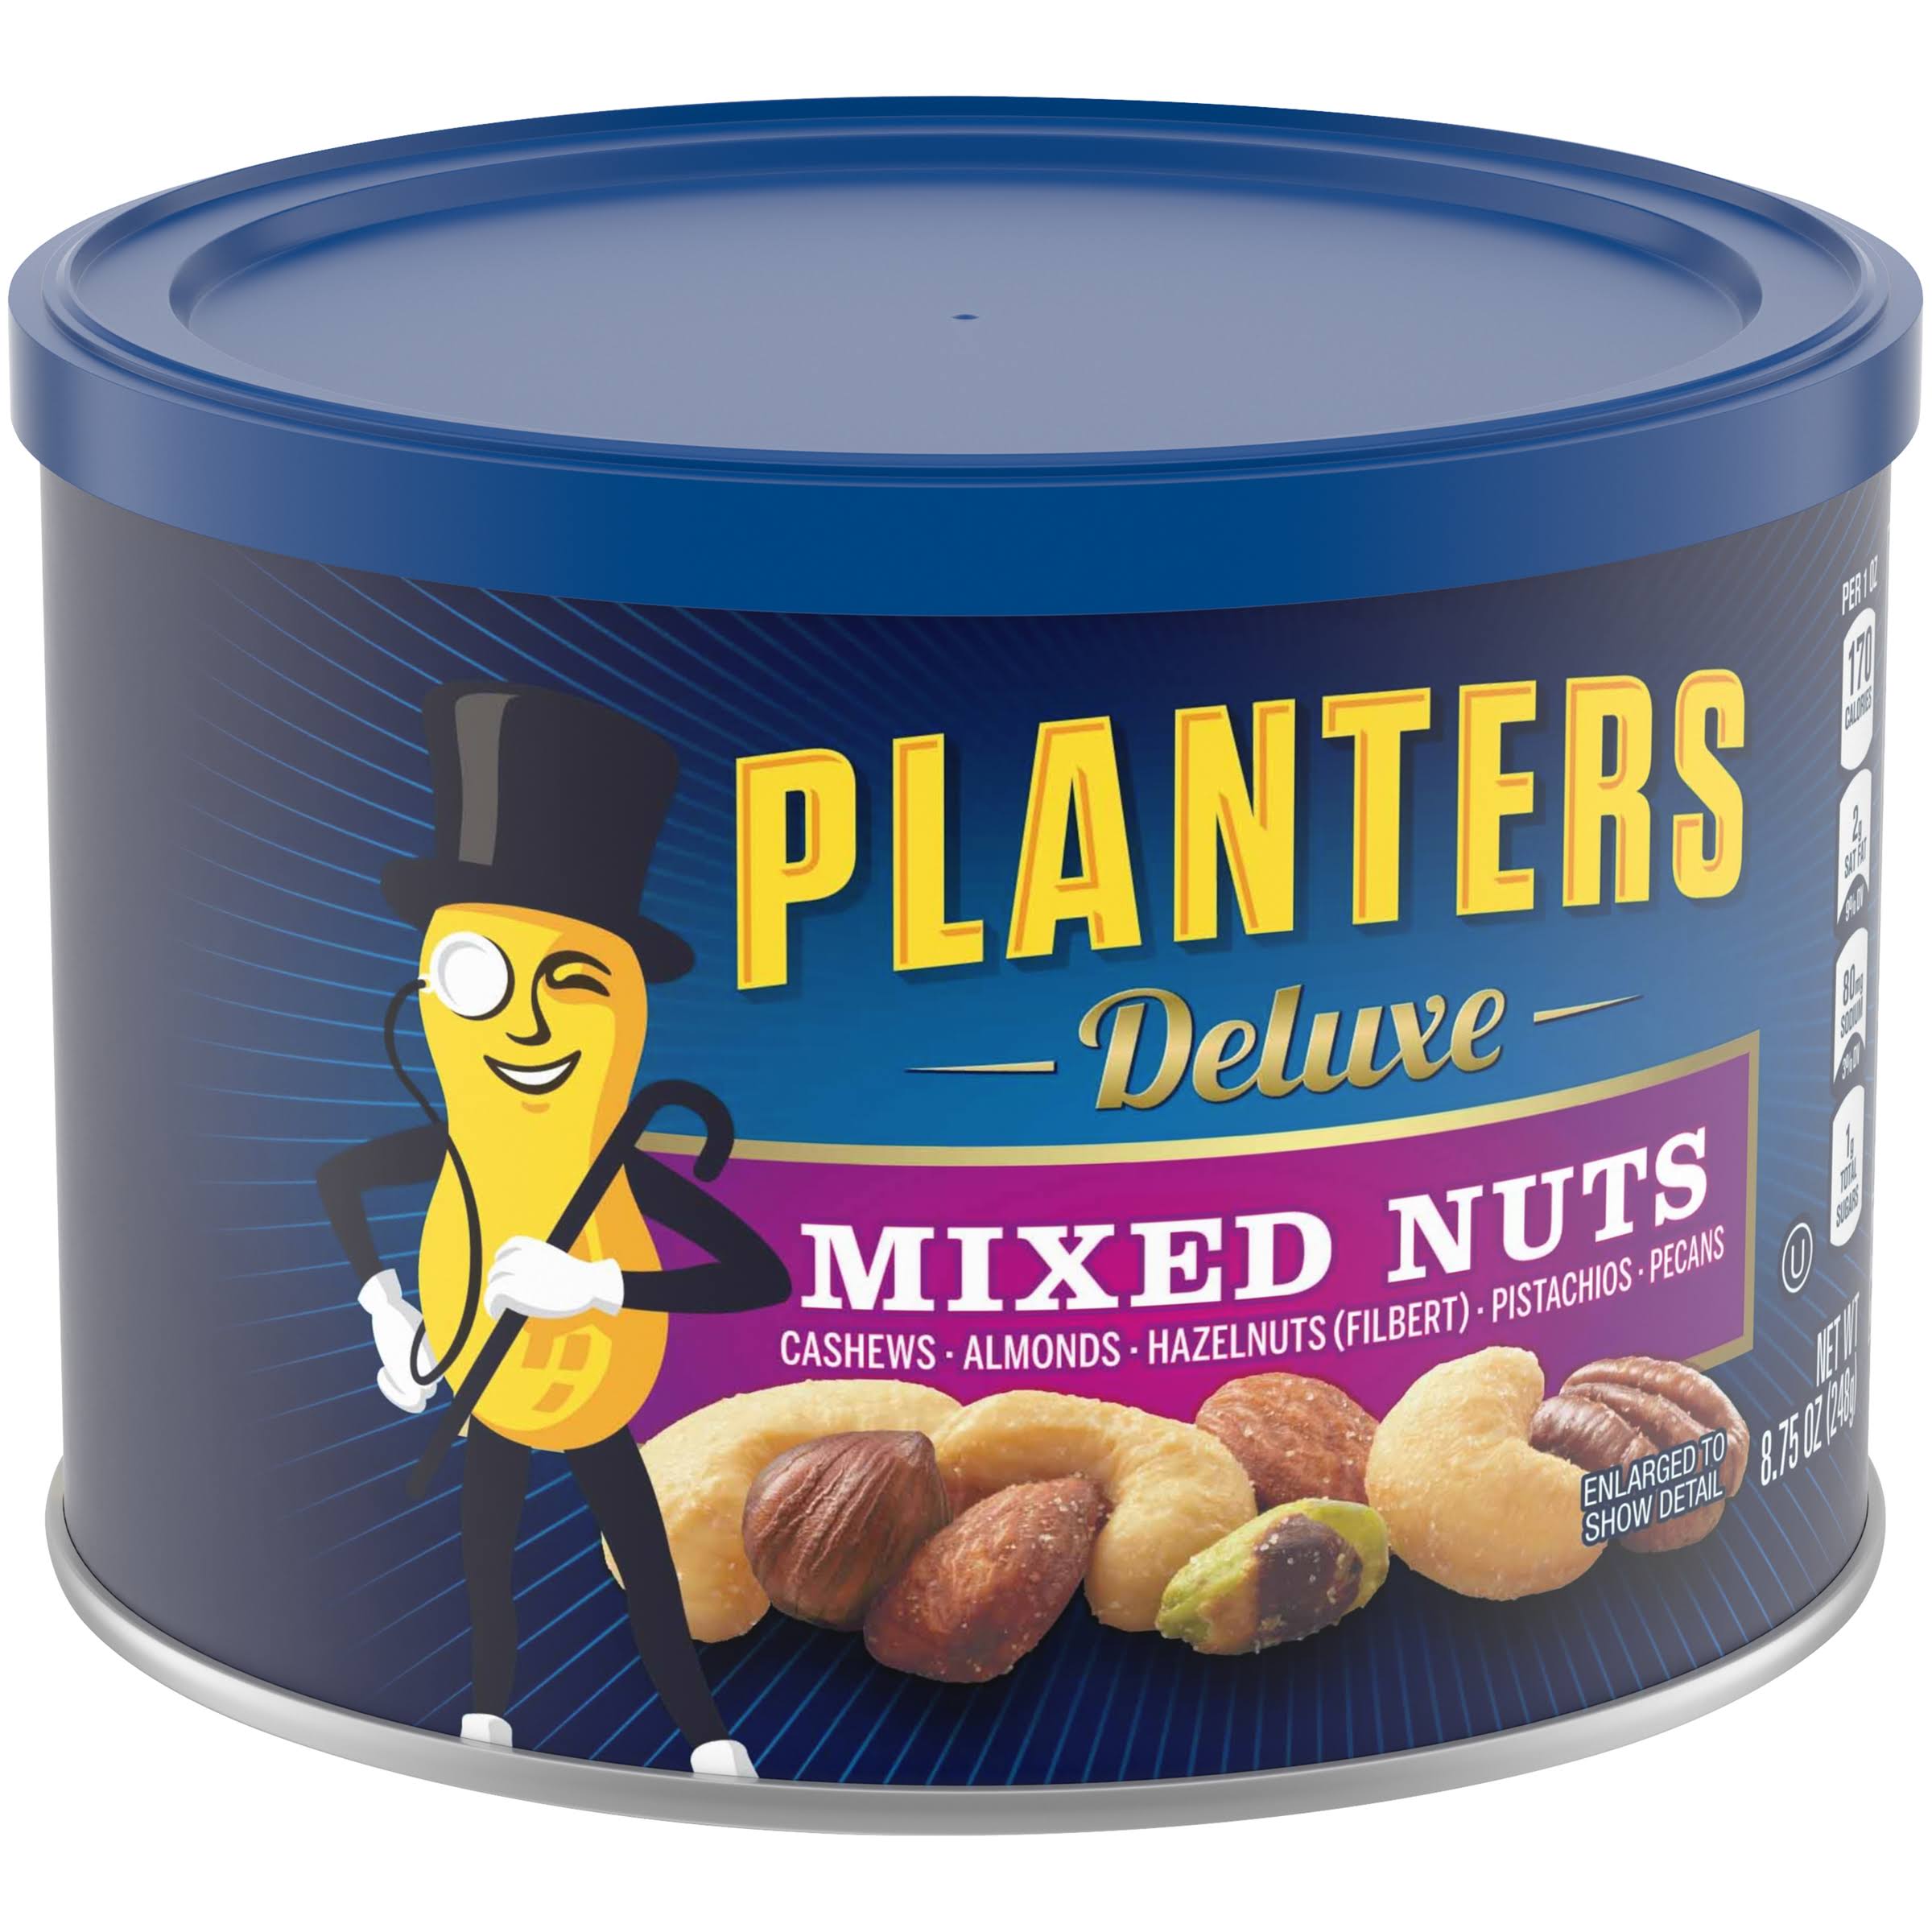 Planters Deluxe Mixed Nuts - 248g